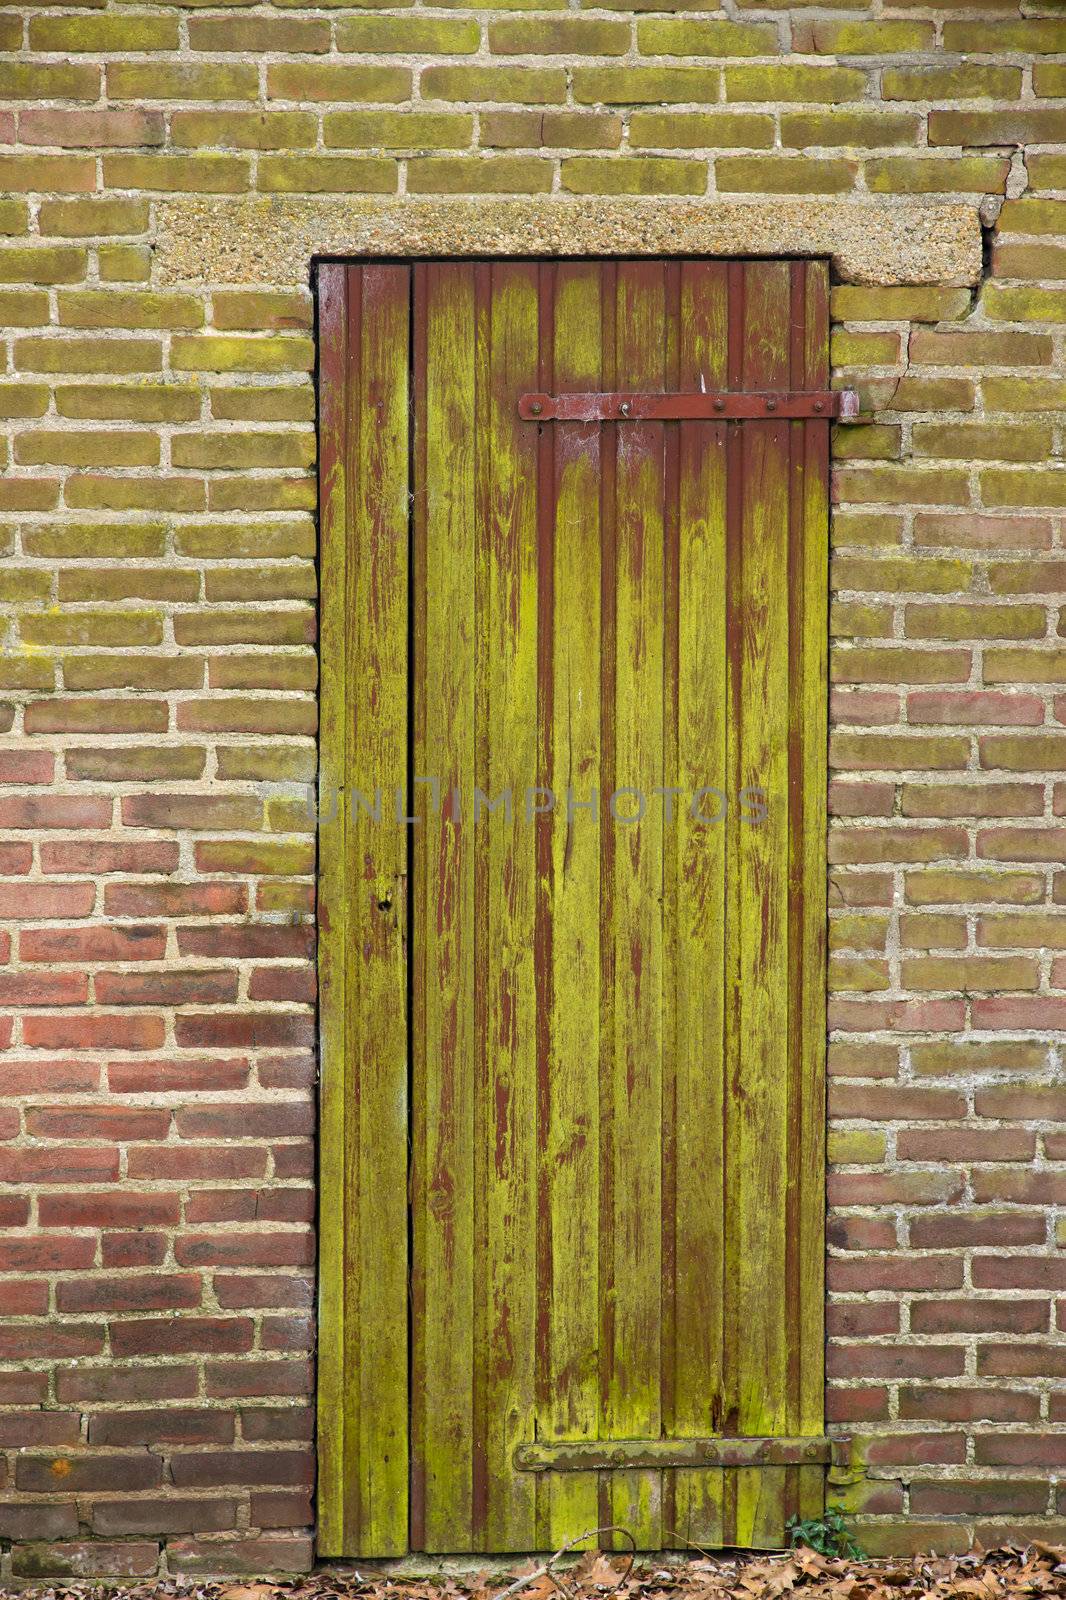 Weathered door in an old wall